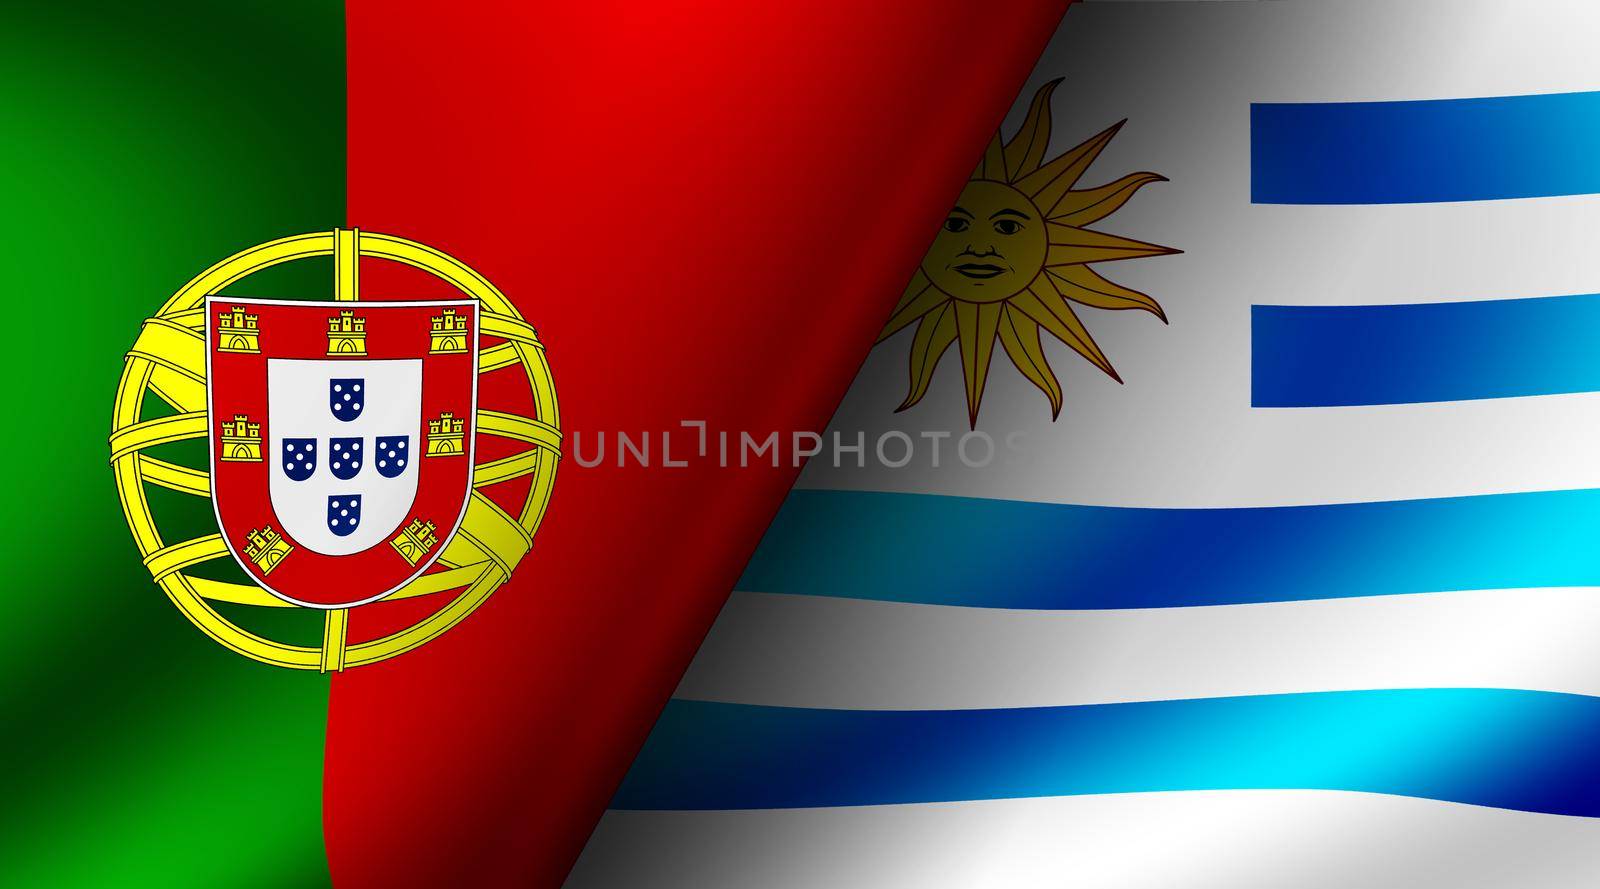 Football 2022 | Group Stage Match Cards (Portugal VS Uruguay) by barks